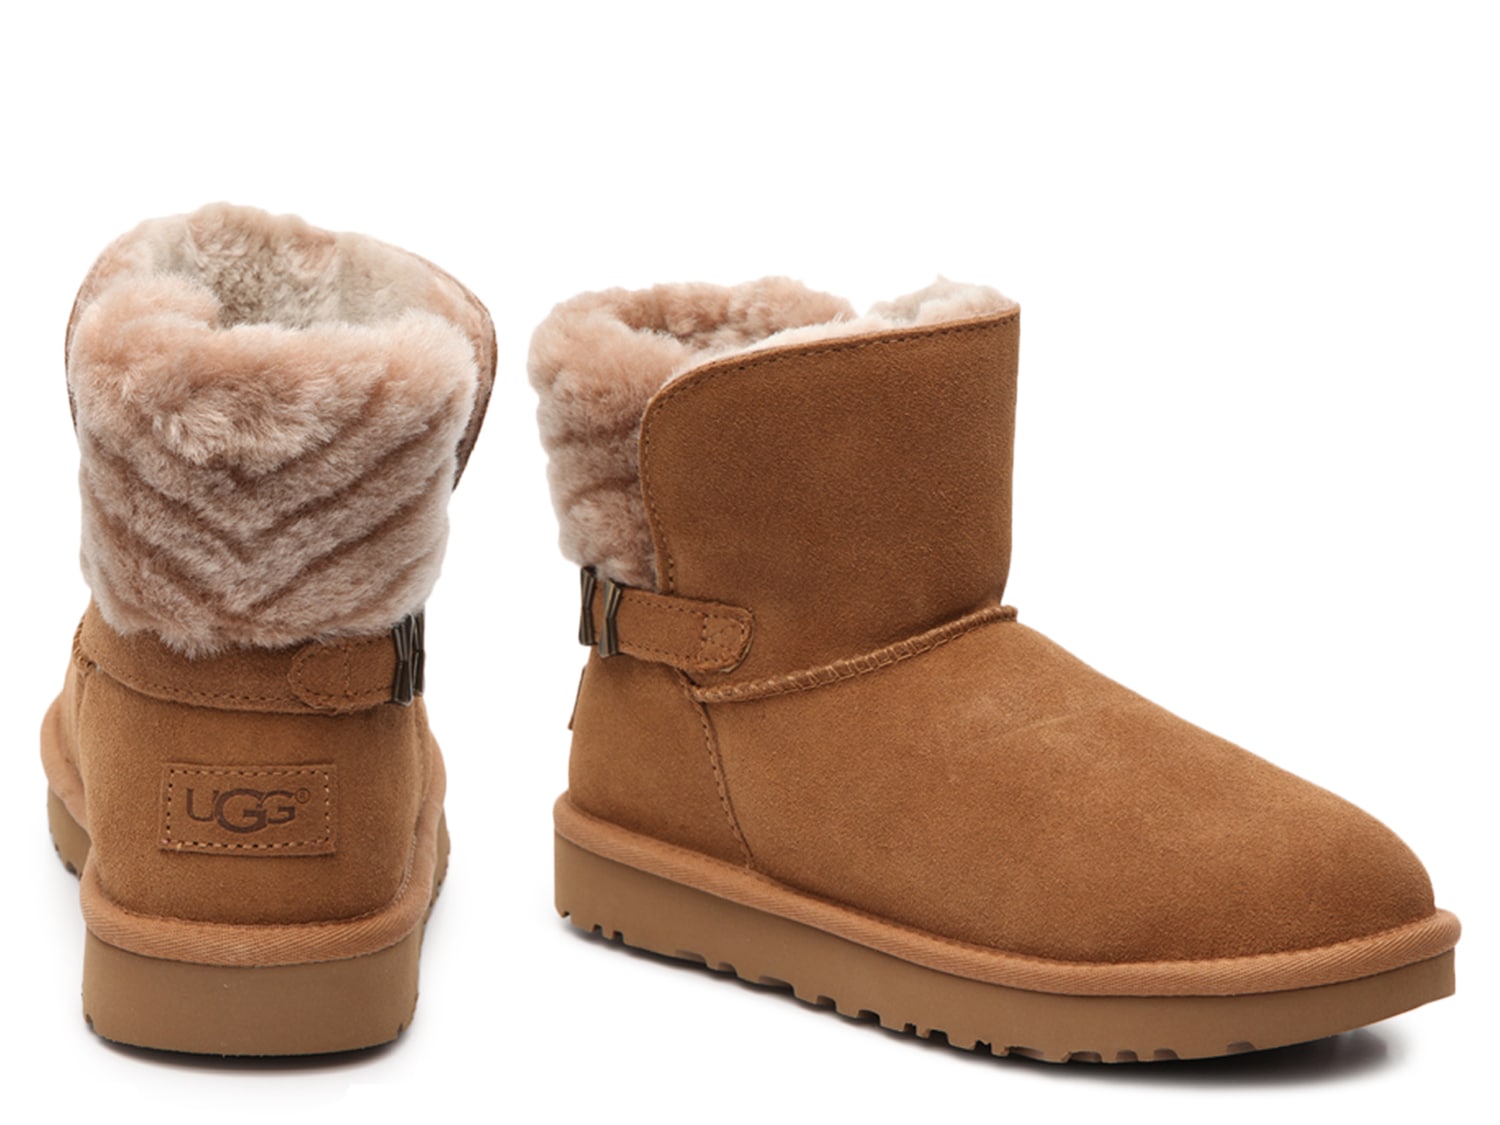 ugg adria bootie Cheaper Than Retail 